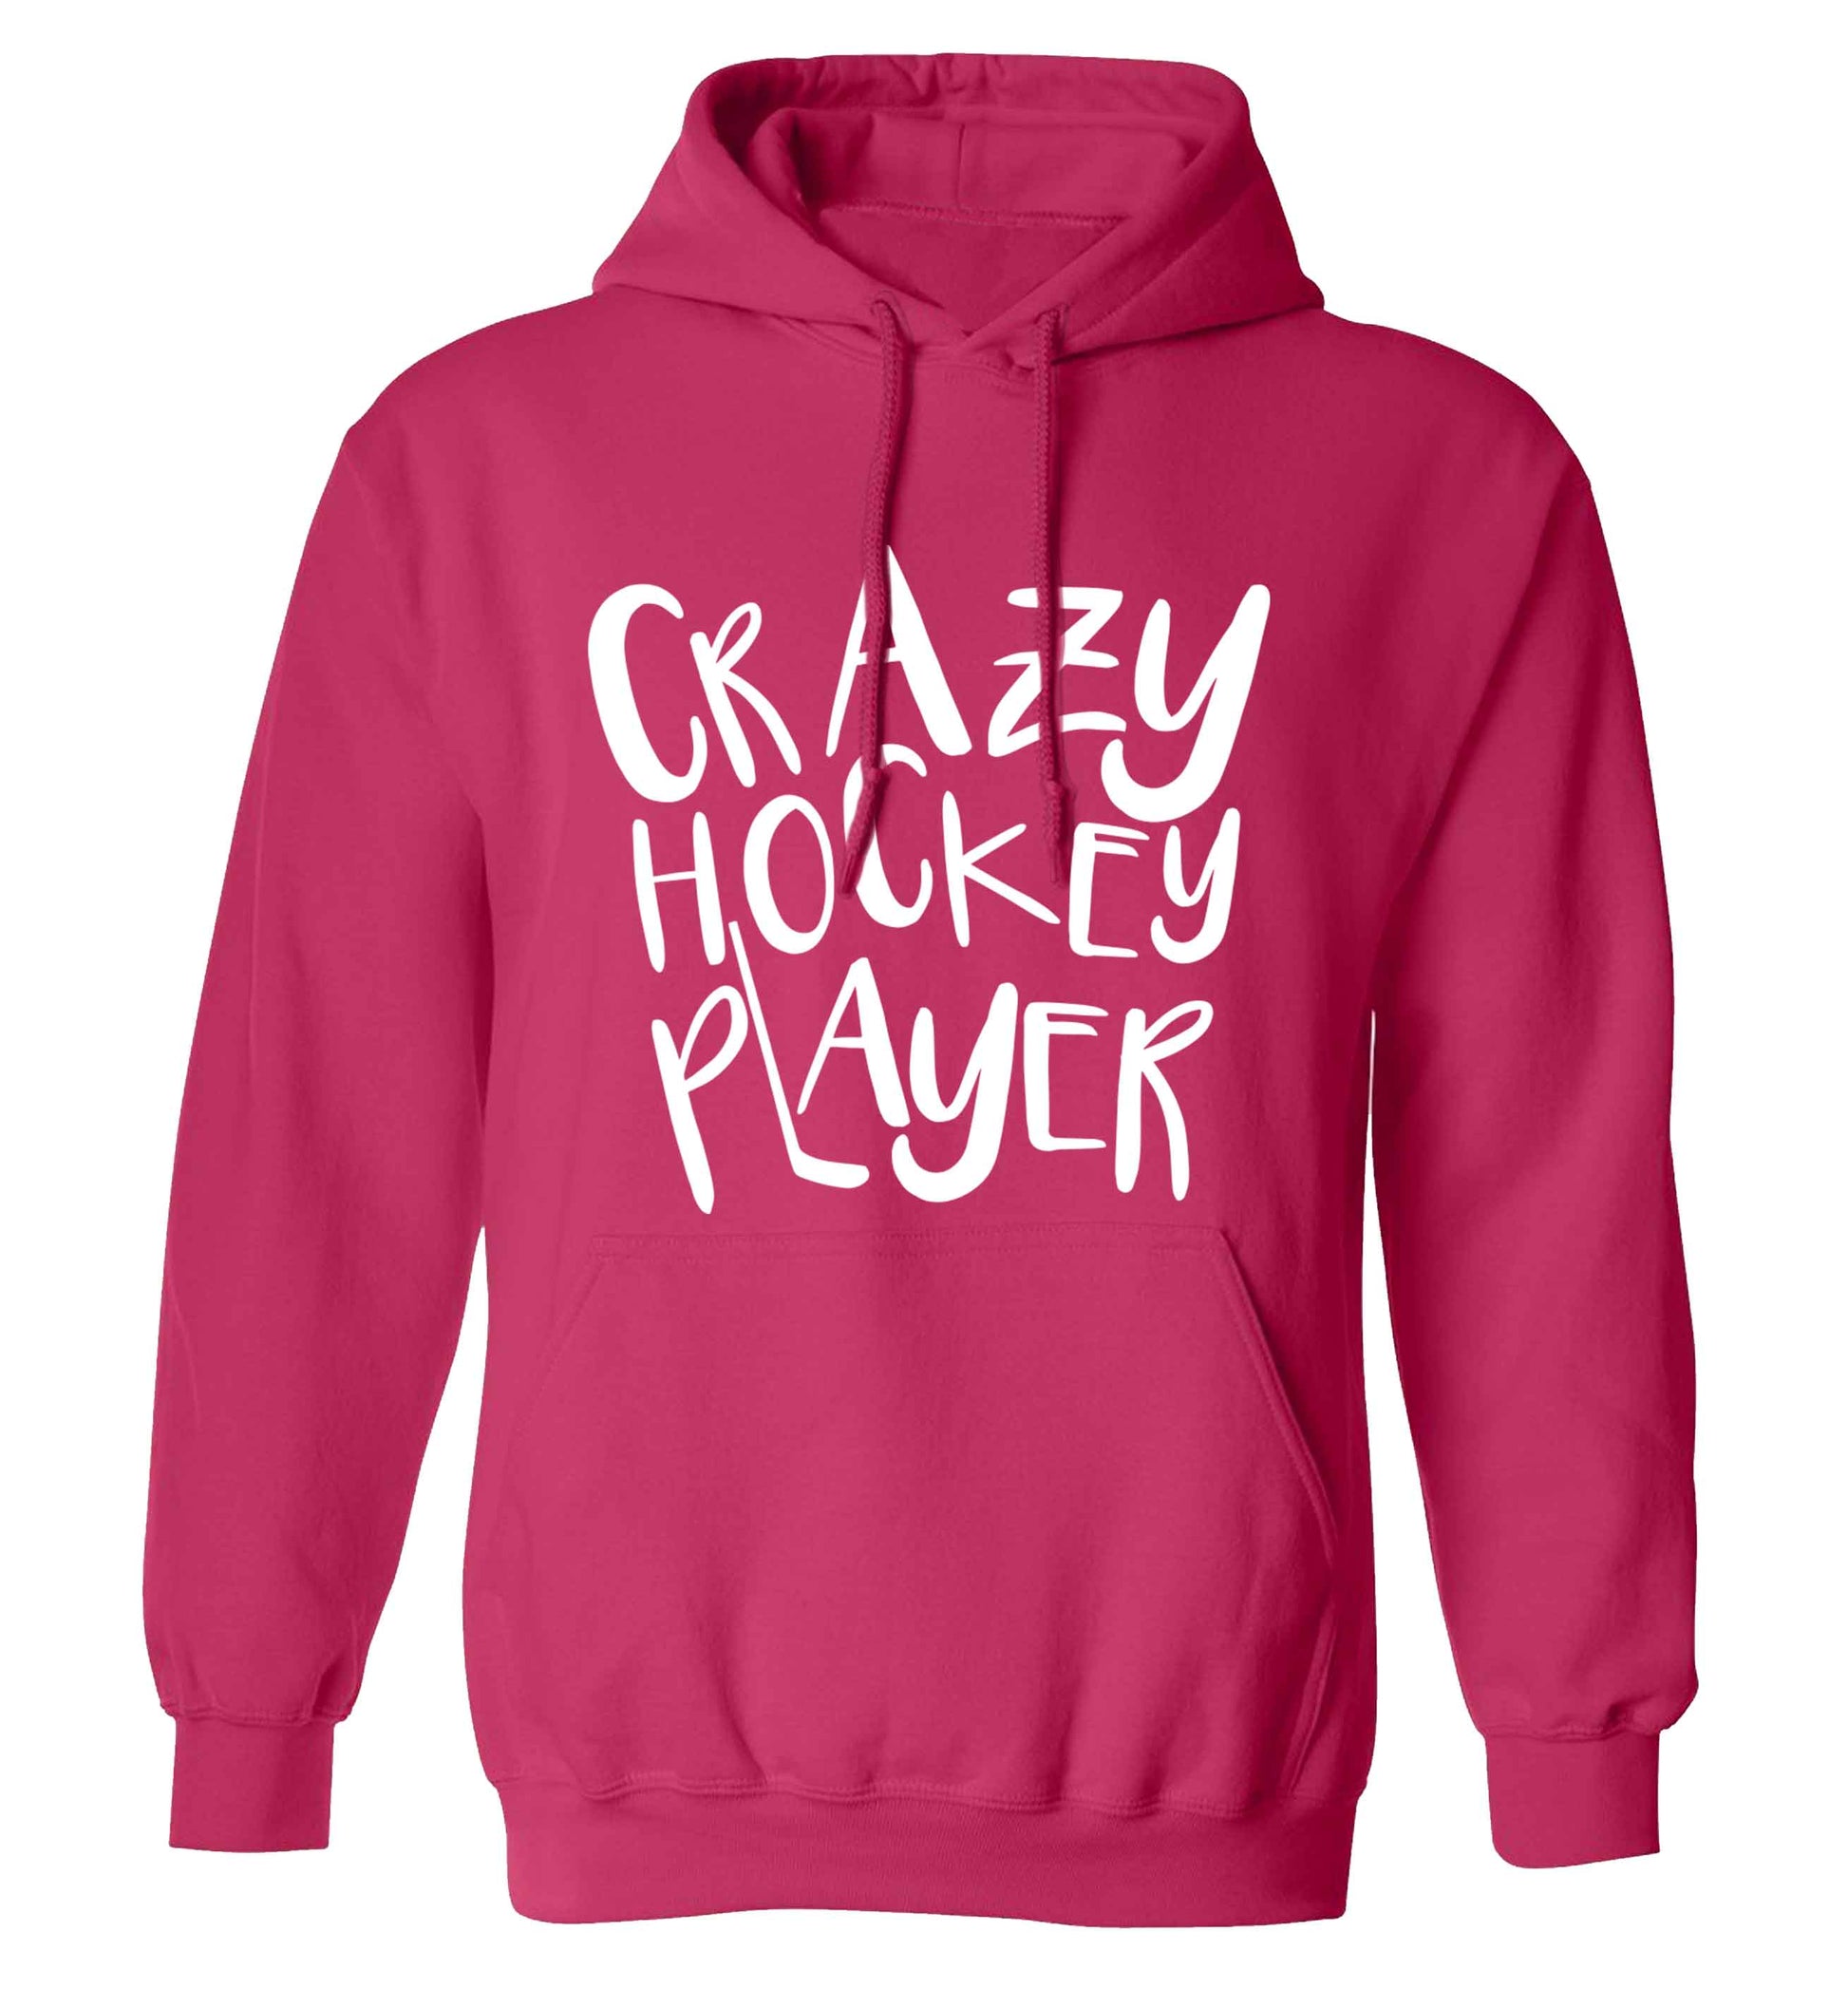 Crazy hockey player adults unisex pink hoodie 2XL